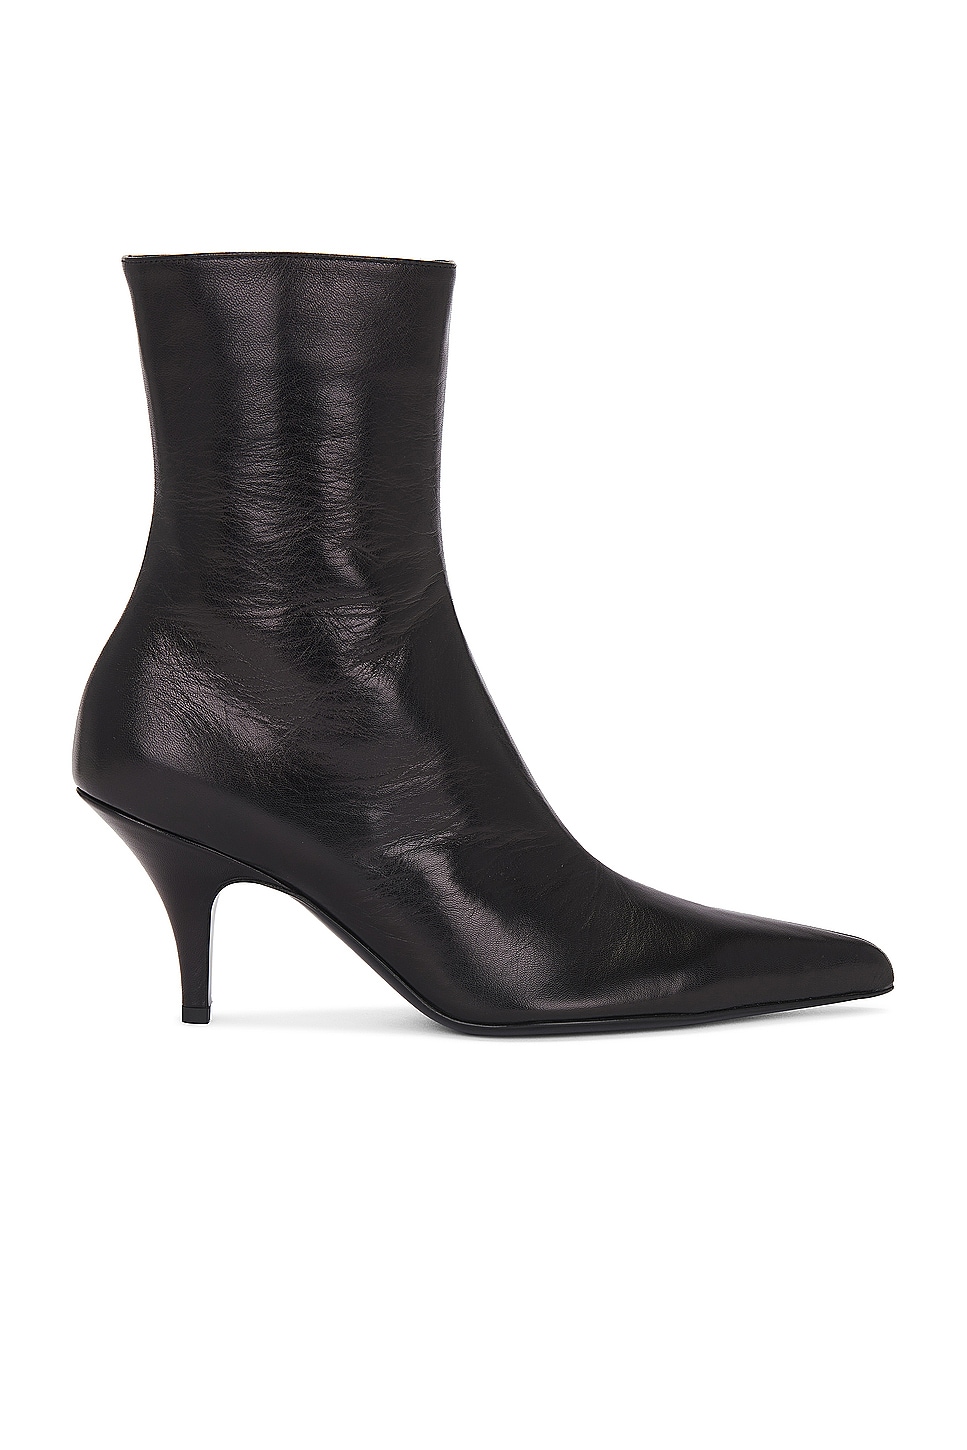 Image 1 of The Row Sling Bootie in BLACK